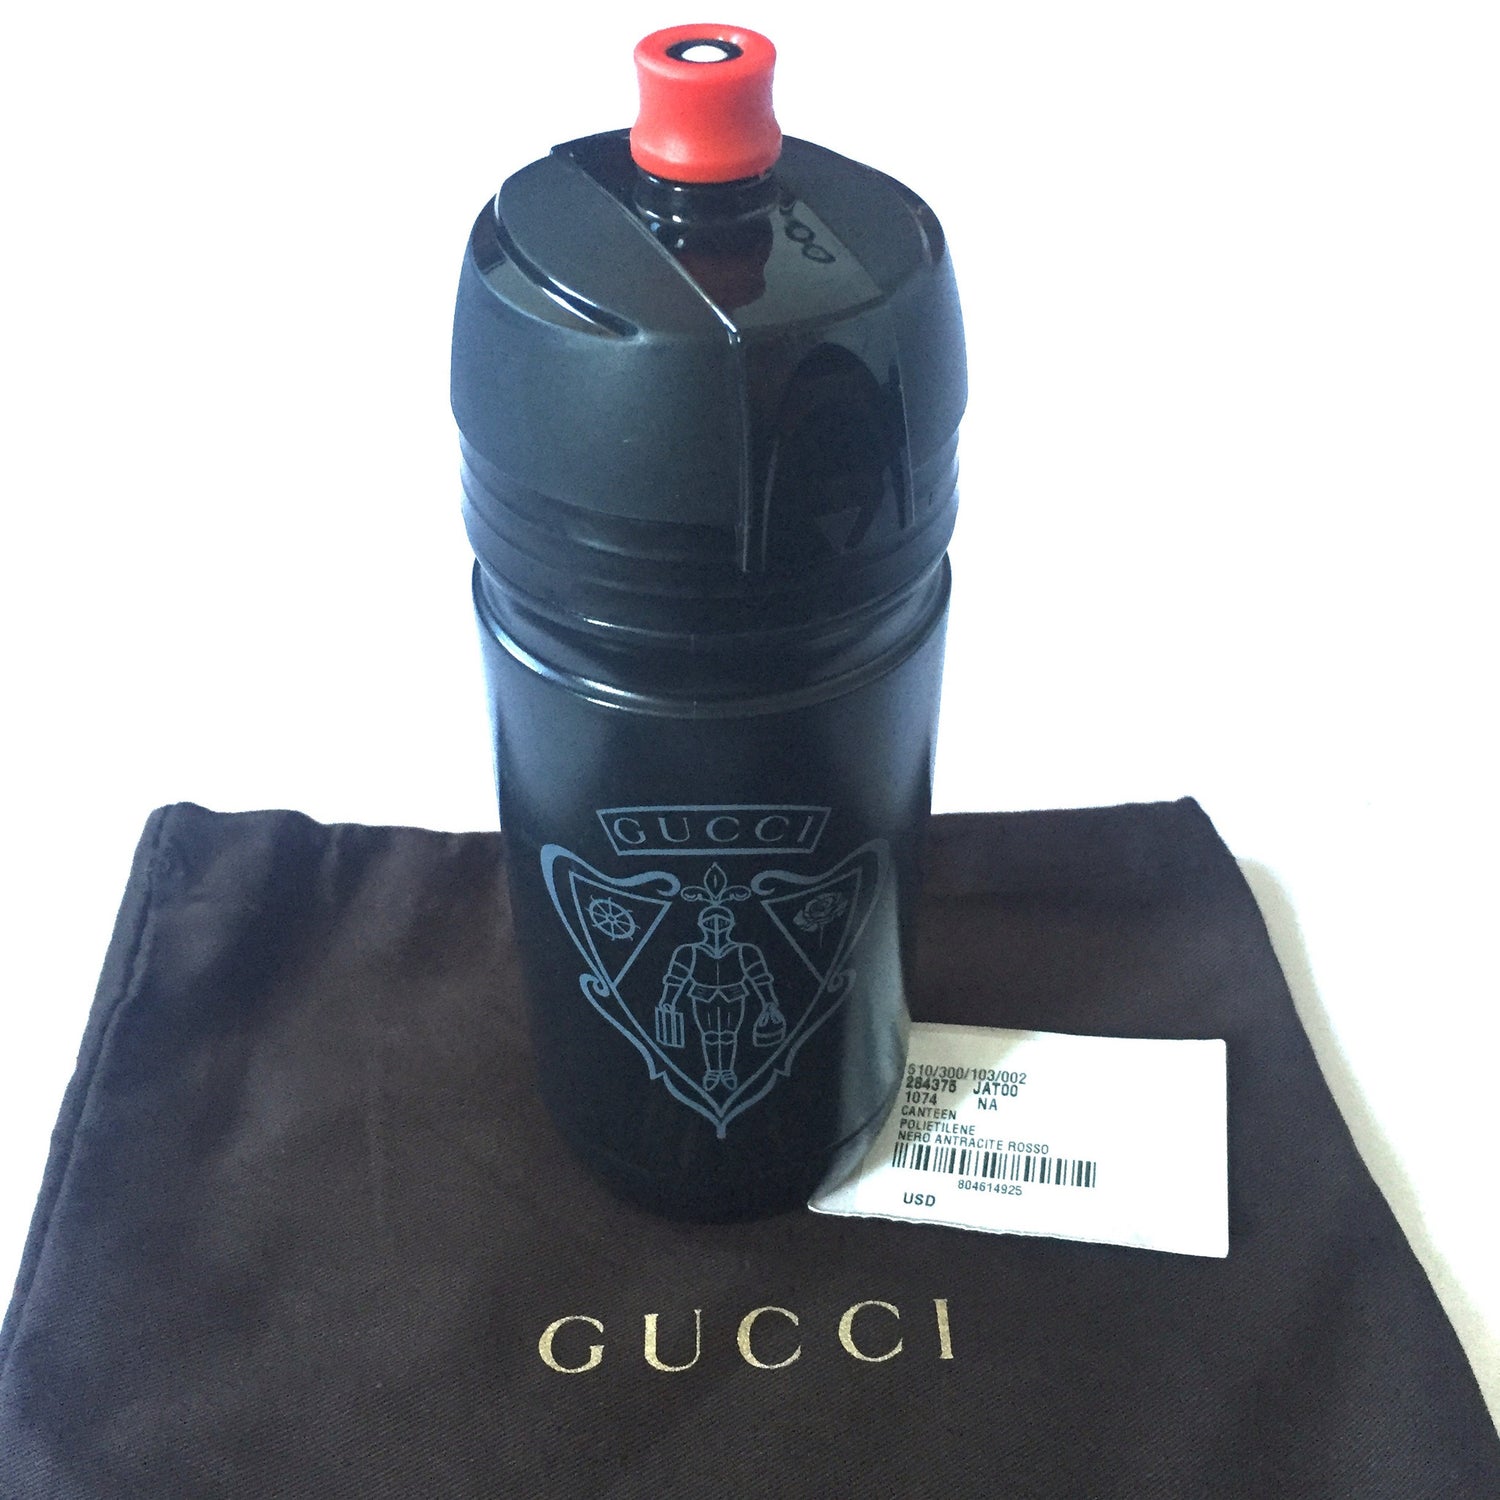 BLACK GUCCI WATER LABELS